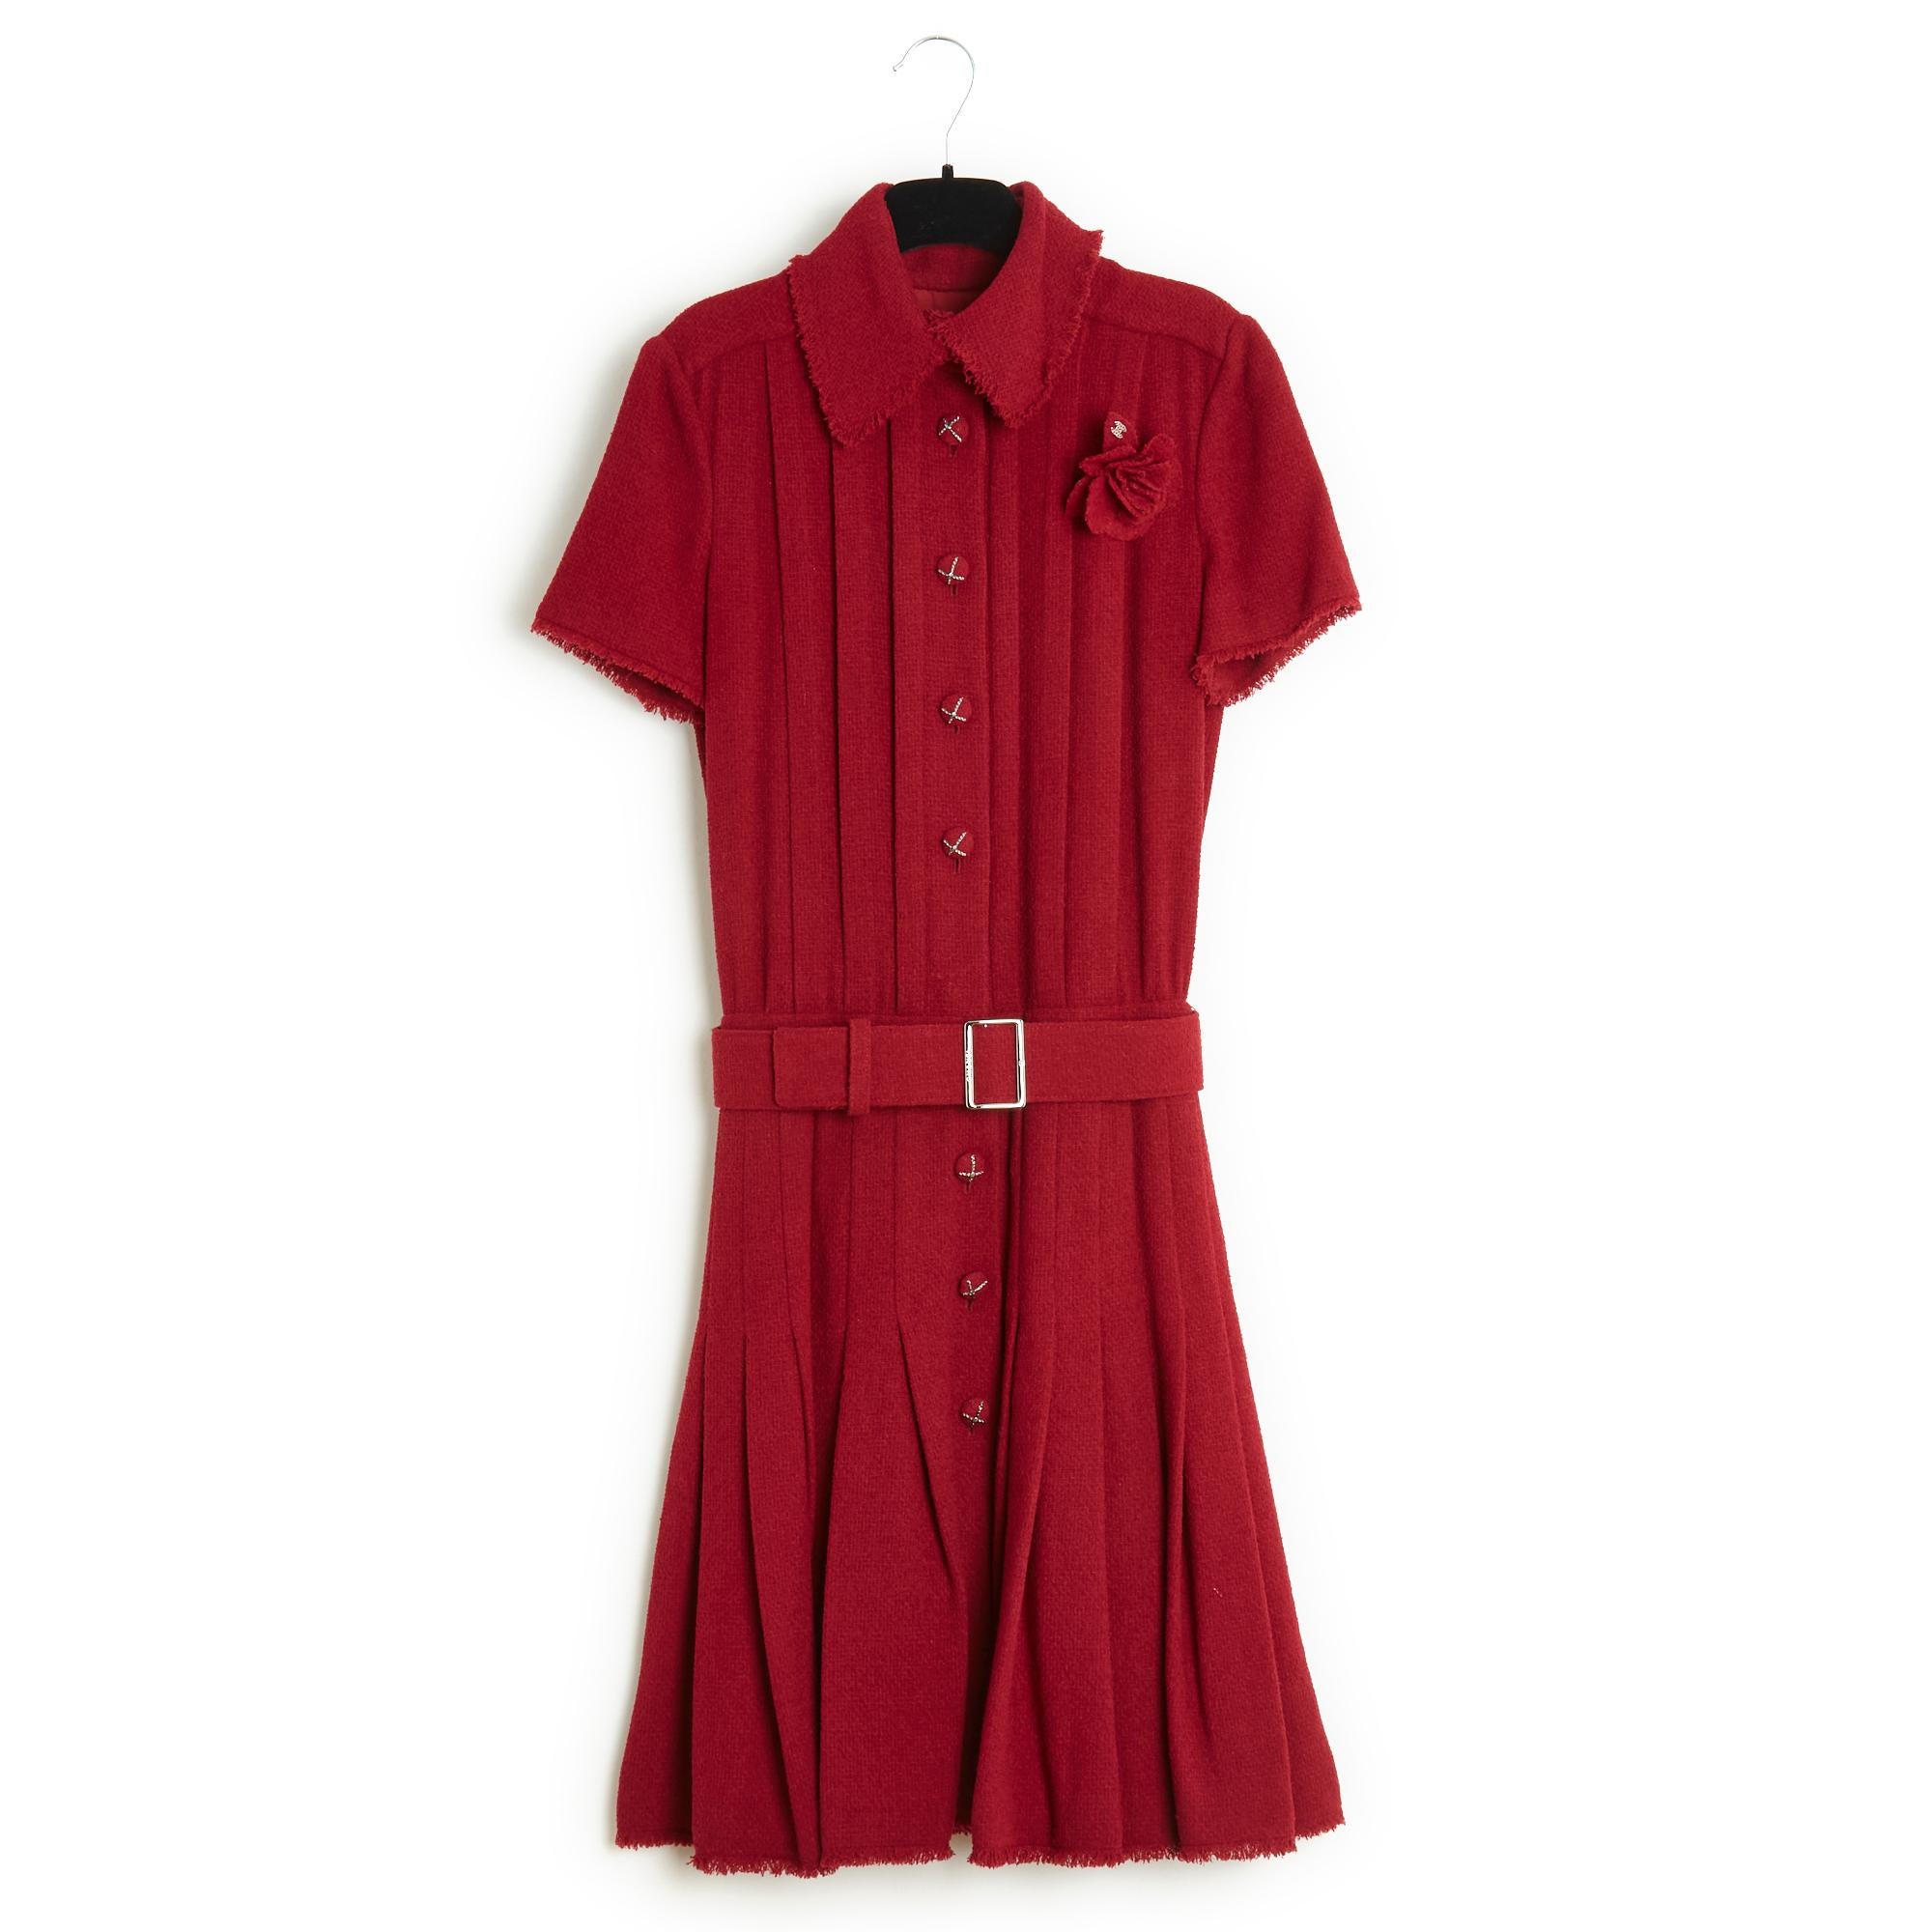 Chanel dress from the AW 2007 collection in dark red wool terry with frayed edges, mid-length, short sleeves, shirt collar closed with 8 jeweled buttons all the way up, hooks and snaps at the waist, under the matching adjustable belt to slide over